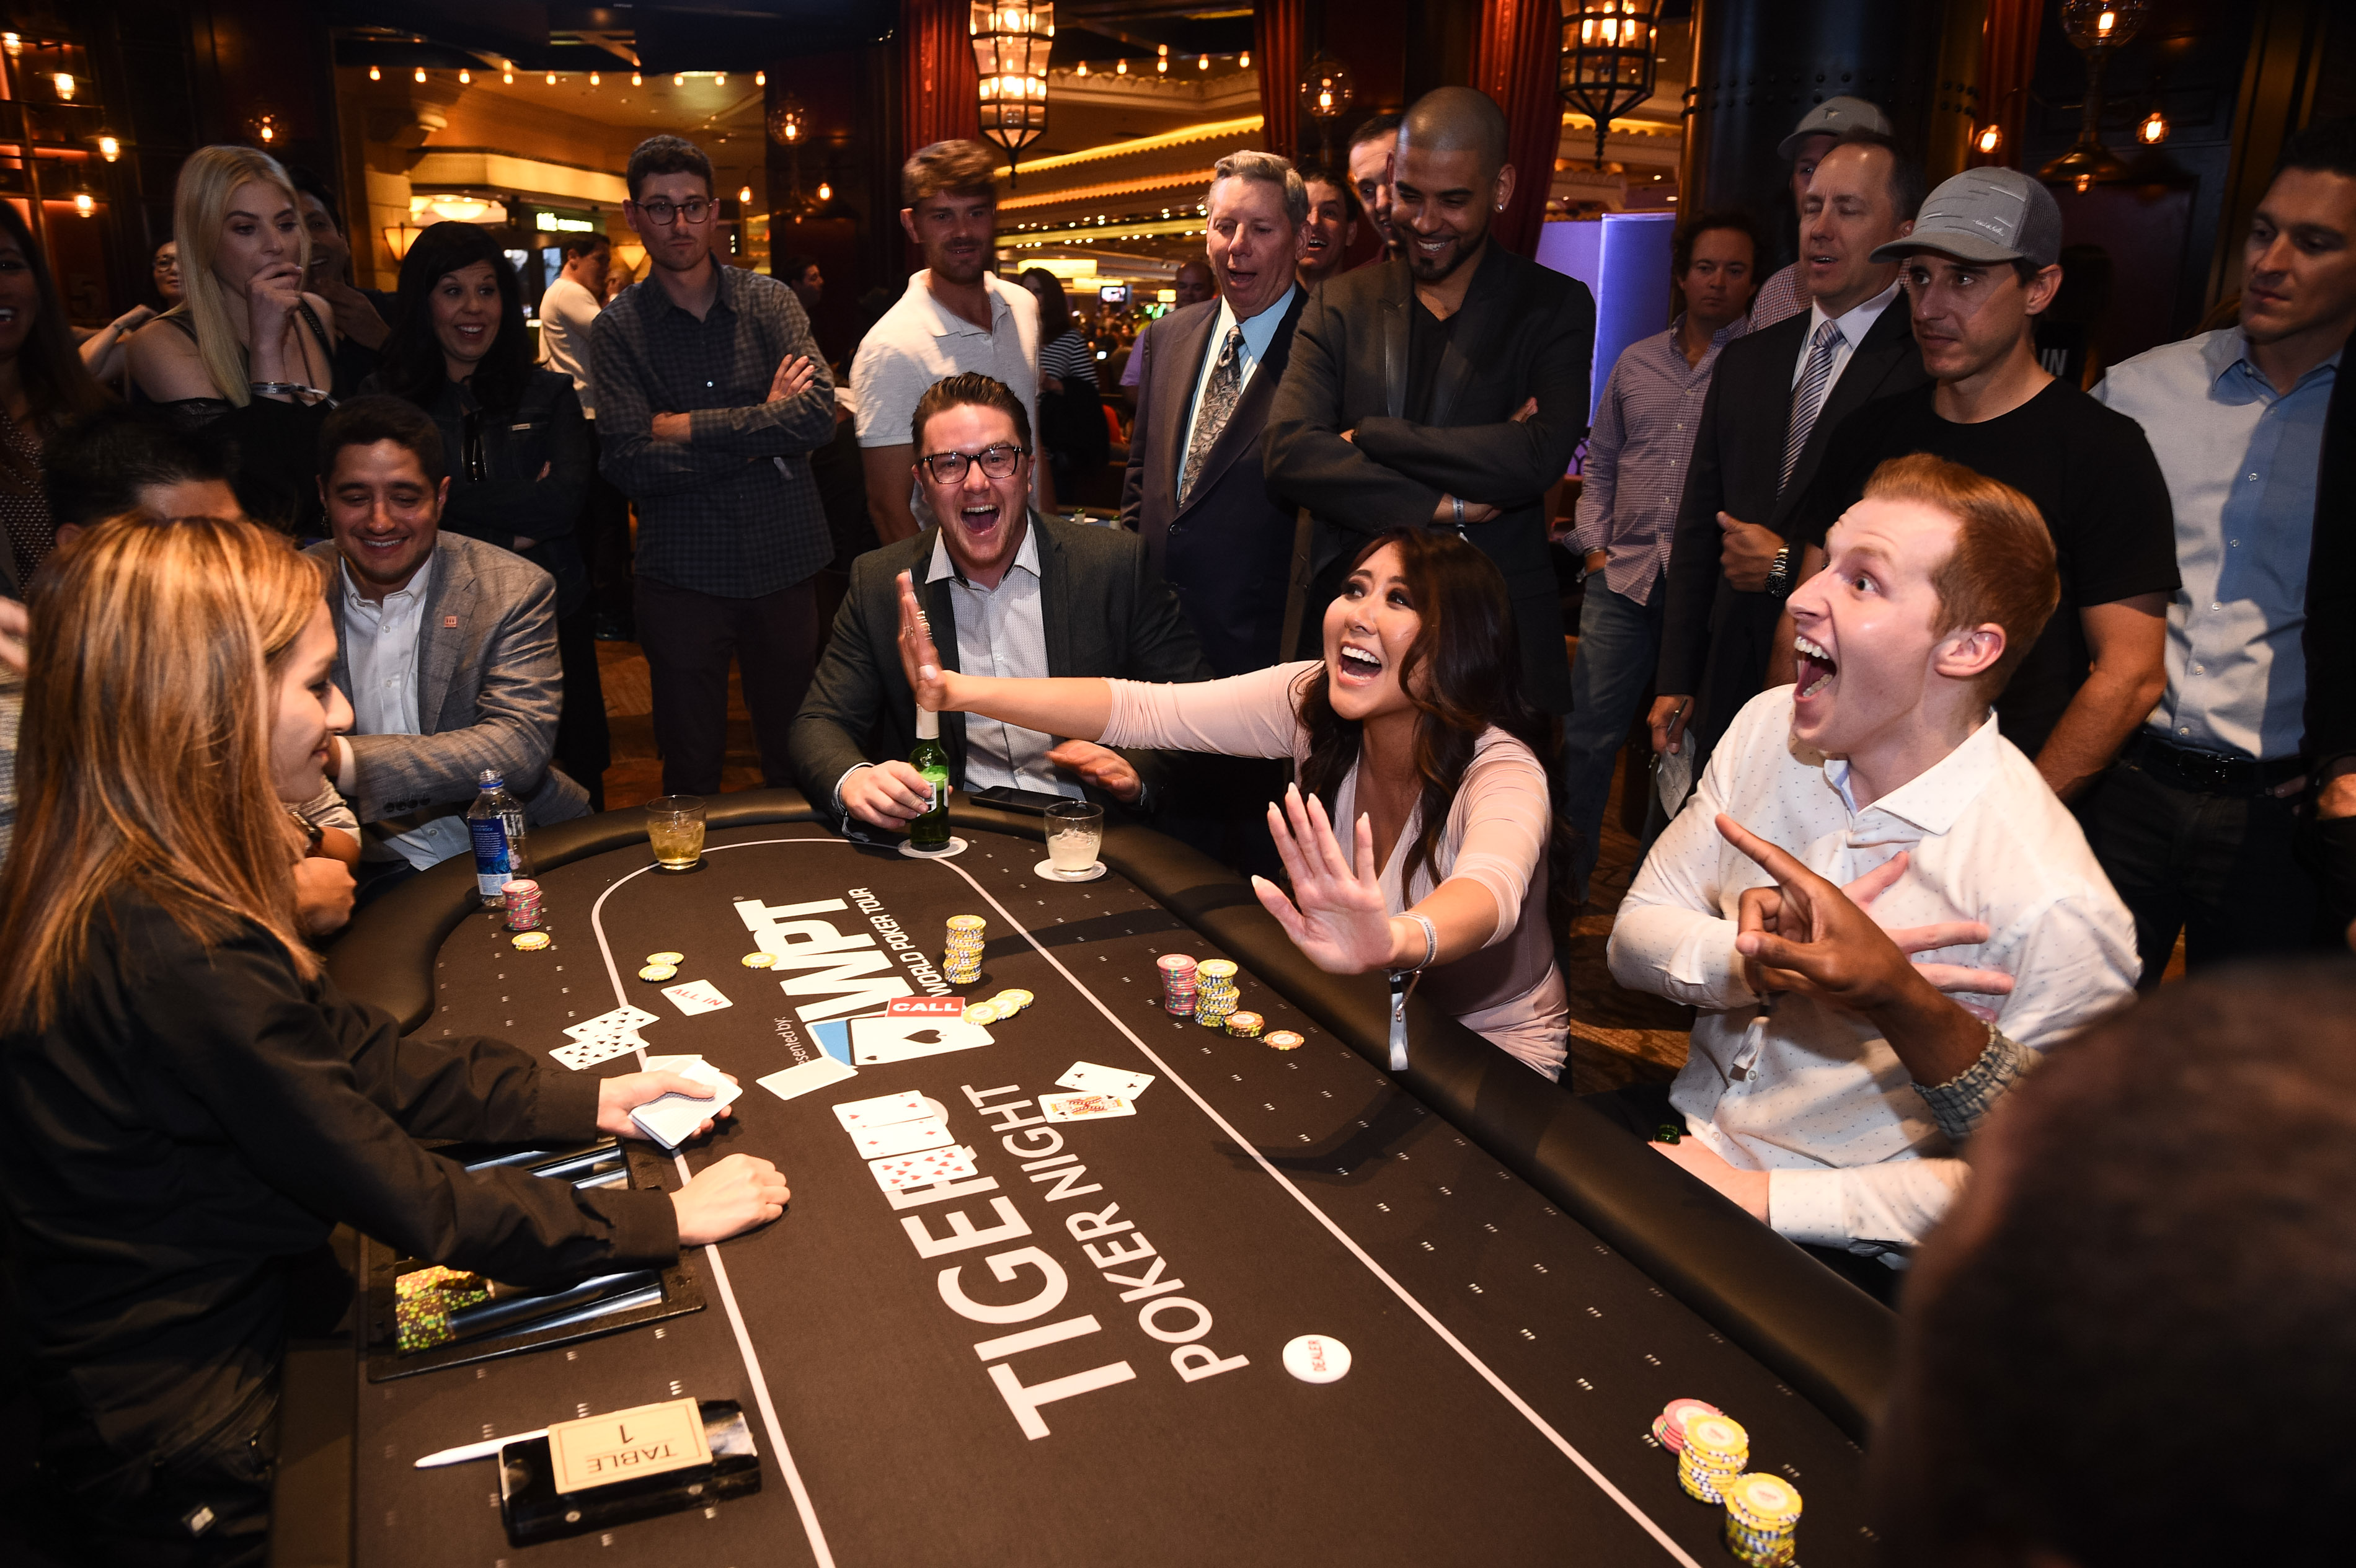 Poker professional Maria Ho gets excited during Tiger's Poker Night presented by the World Poker Tour